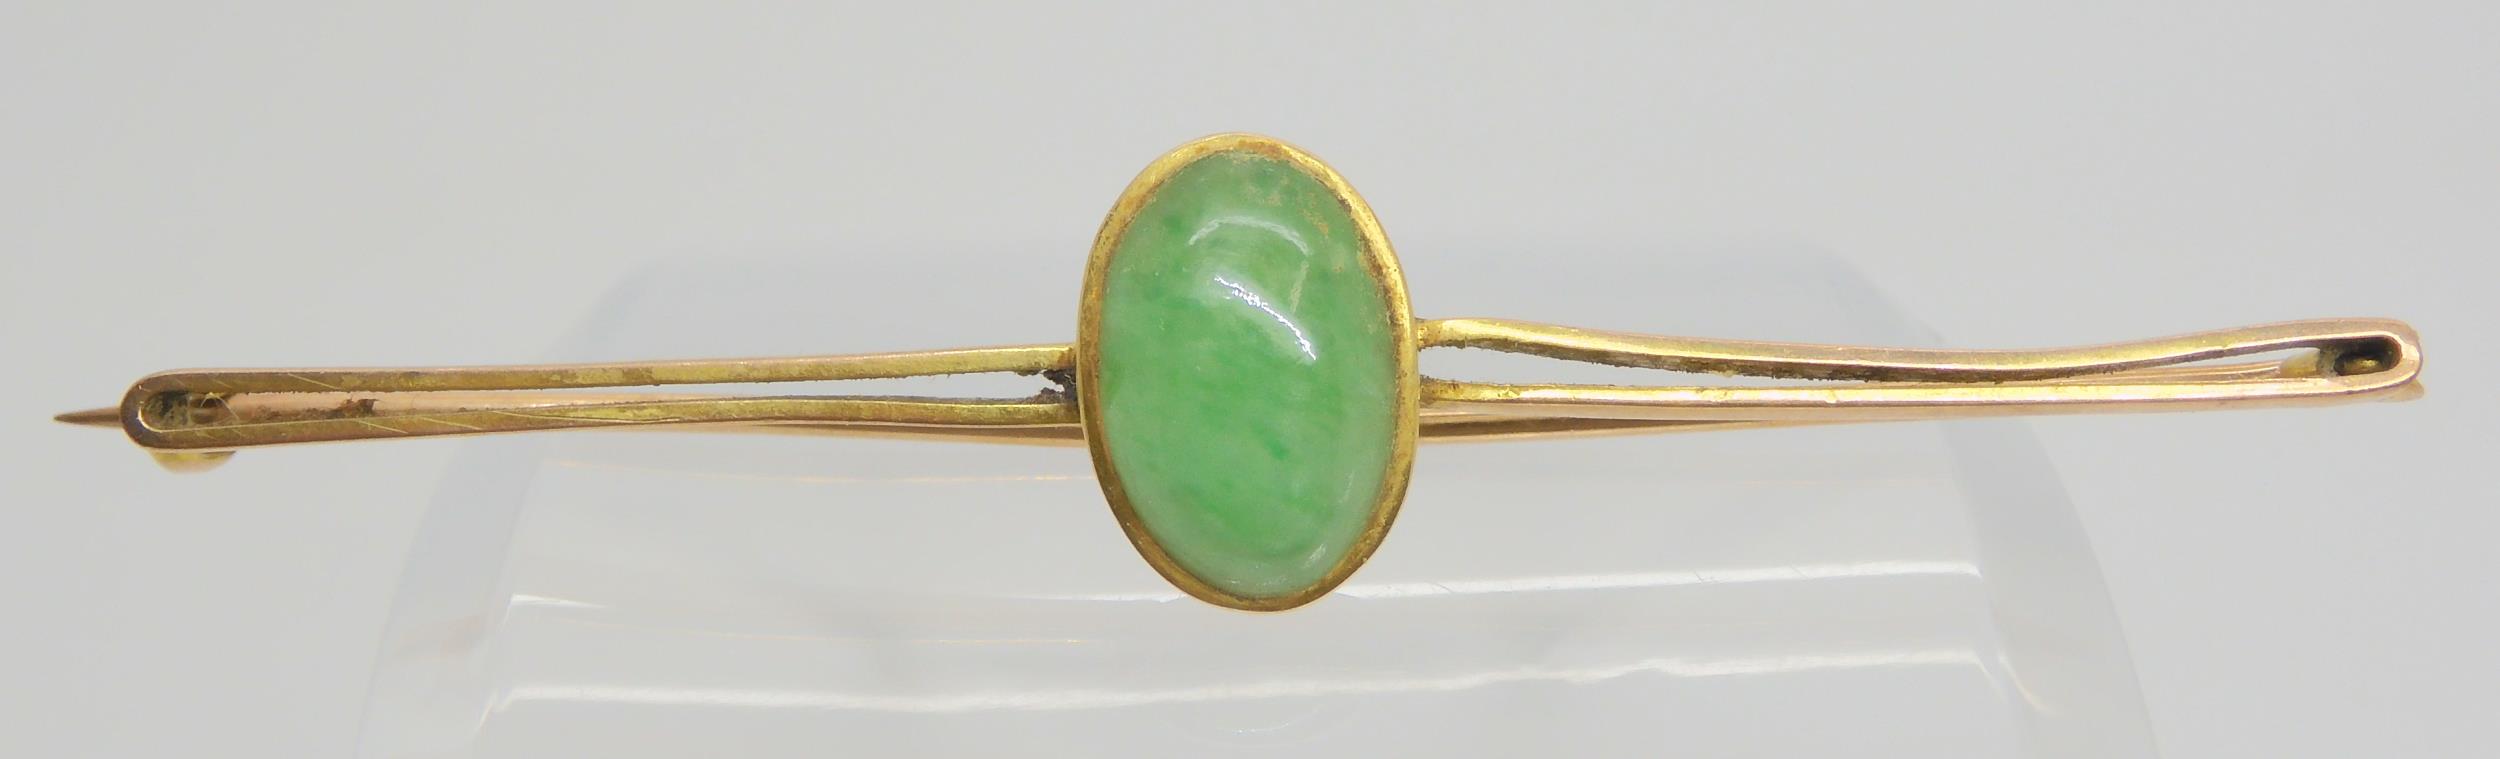 A 9ct gold Chinese green hardstone brooch, hardstone approx 12mm x 8mm, weight 3.7gms Condition